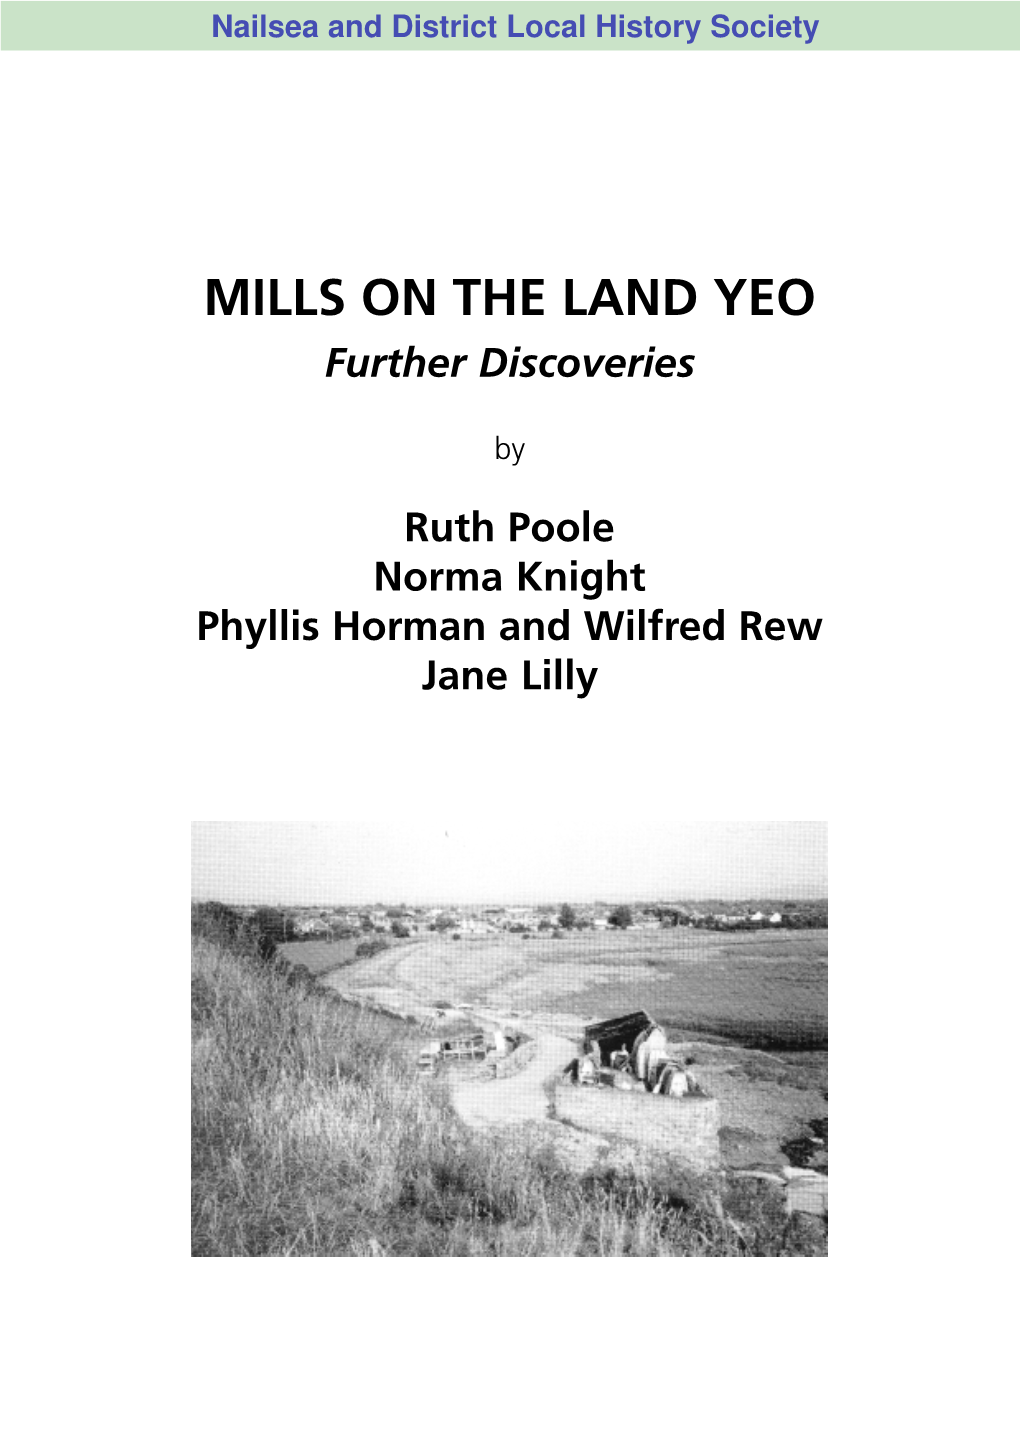 MILLS on the LAND YEO Further Discoveries